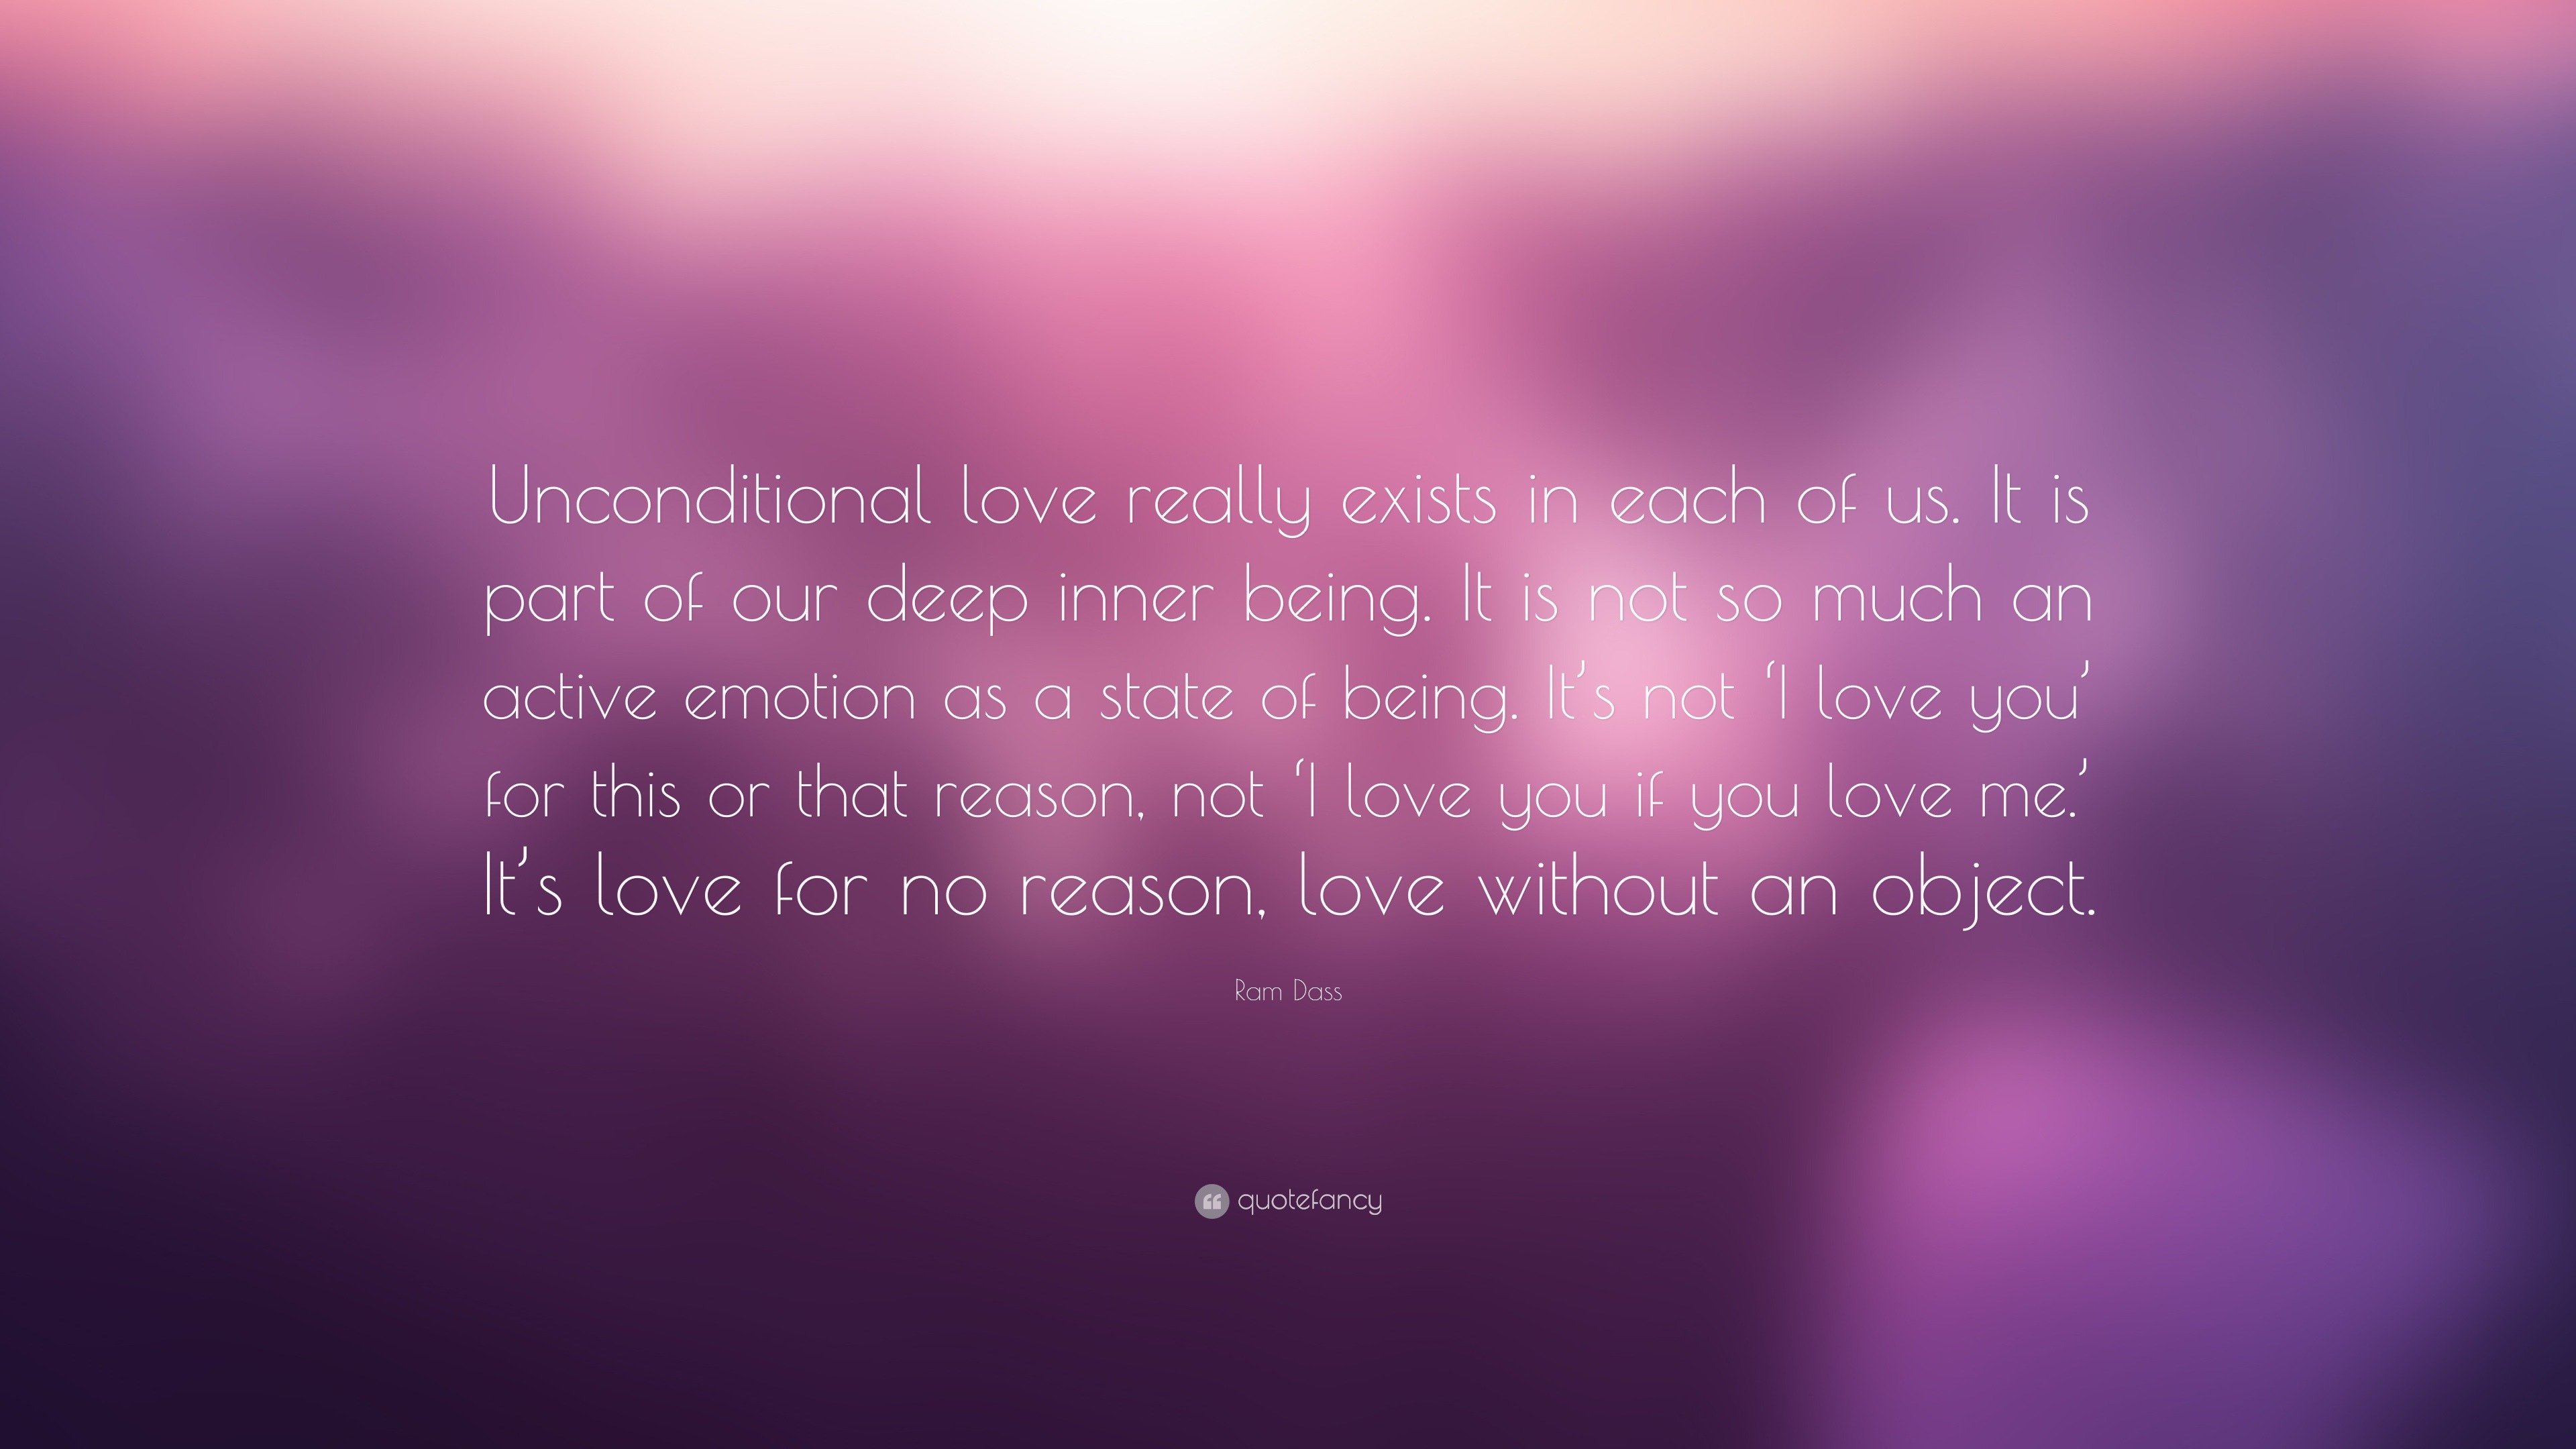 Ram Dass Quote “Unconditional love really exists in each of us It is